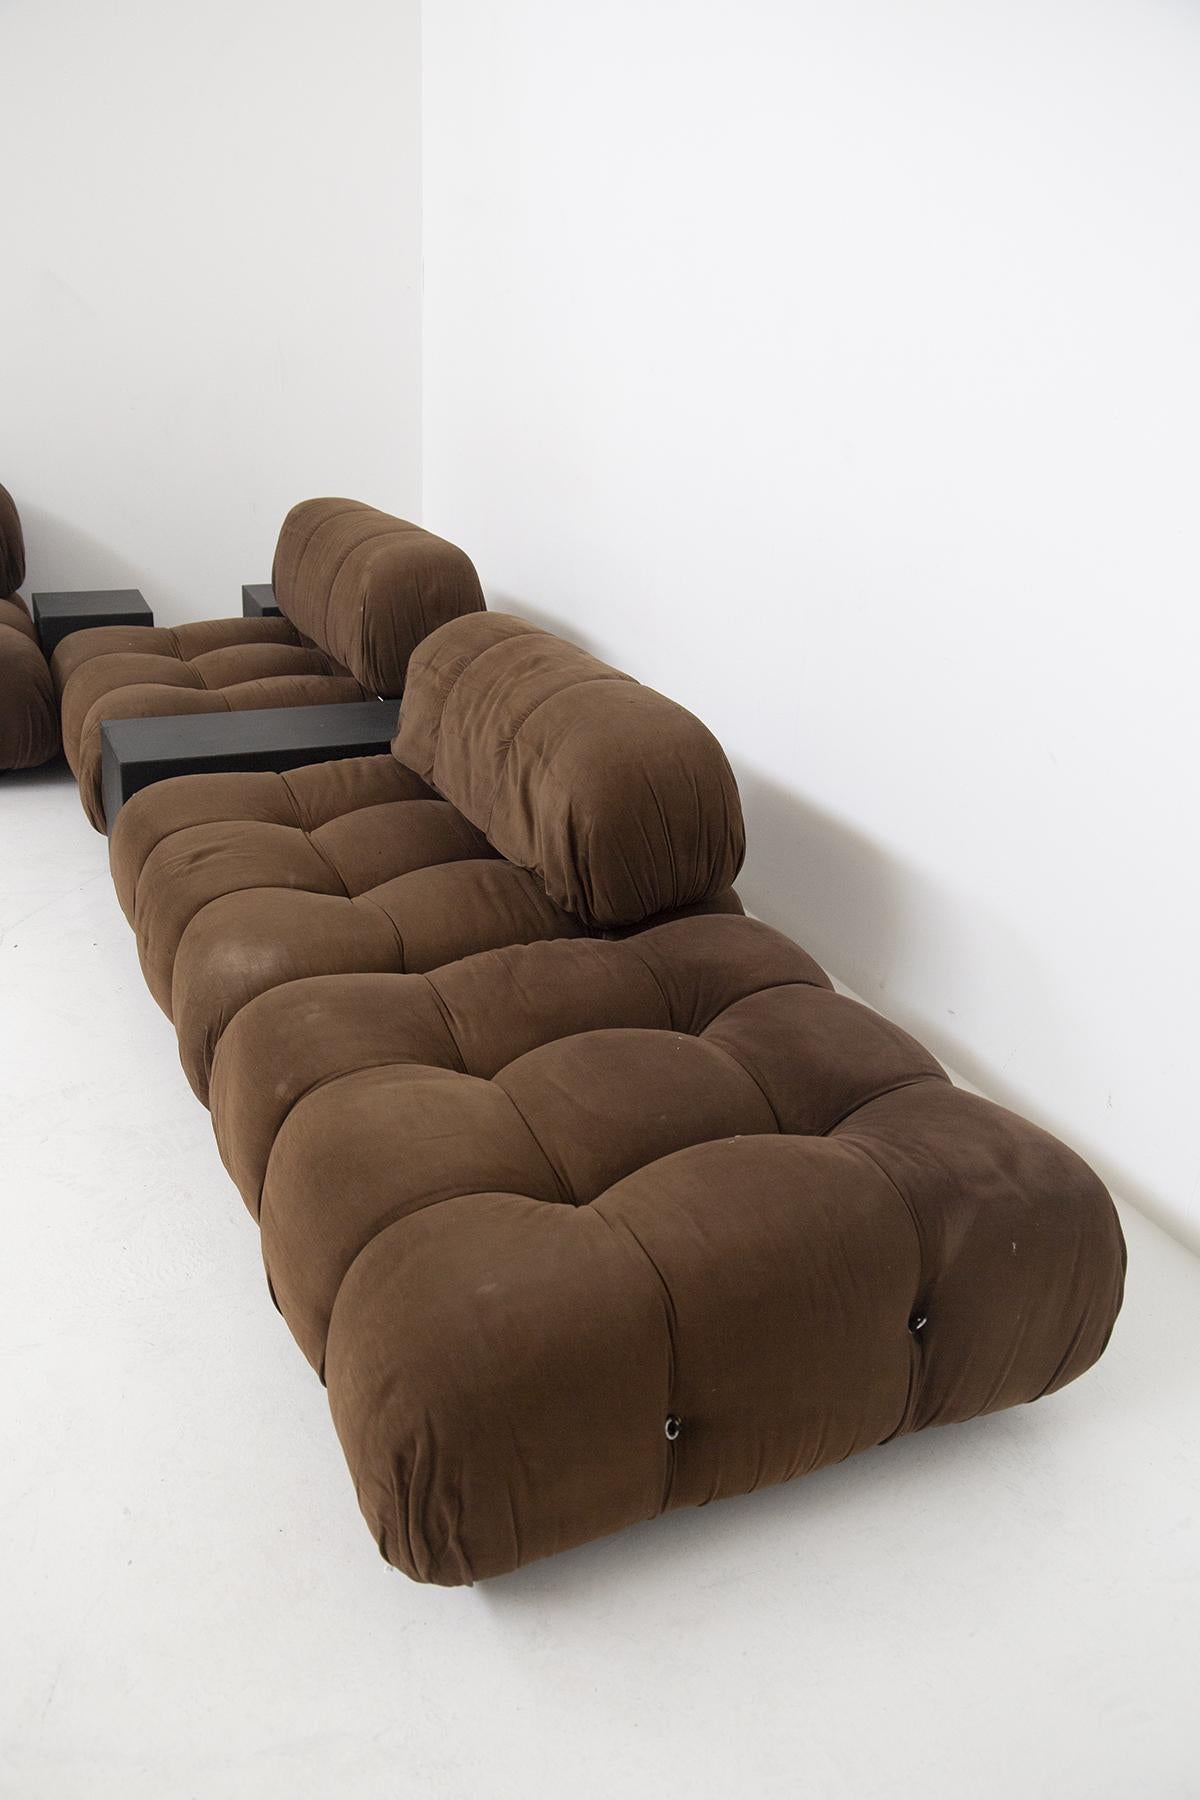 Camaleonda is a unique design piece that represents an Italian icon. The Camaleonda was first designed in 1970 by the magnificent Italian designer Mario Bellini, who created one of the first truly modular sofas, evolving into contemporary living